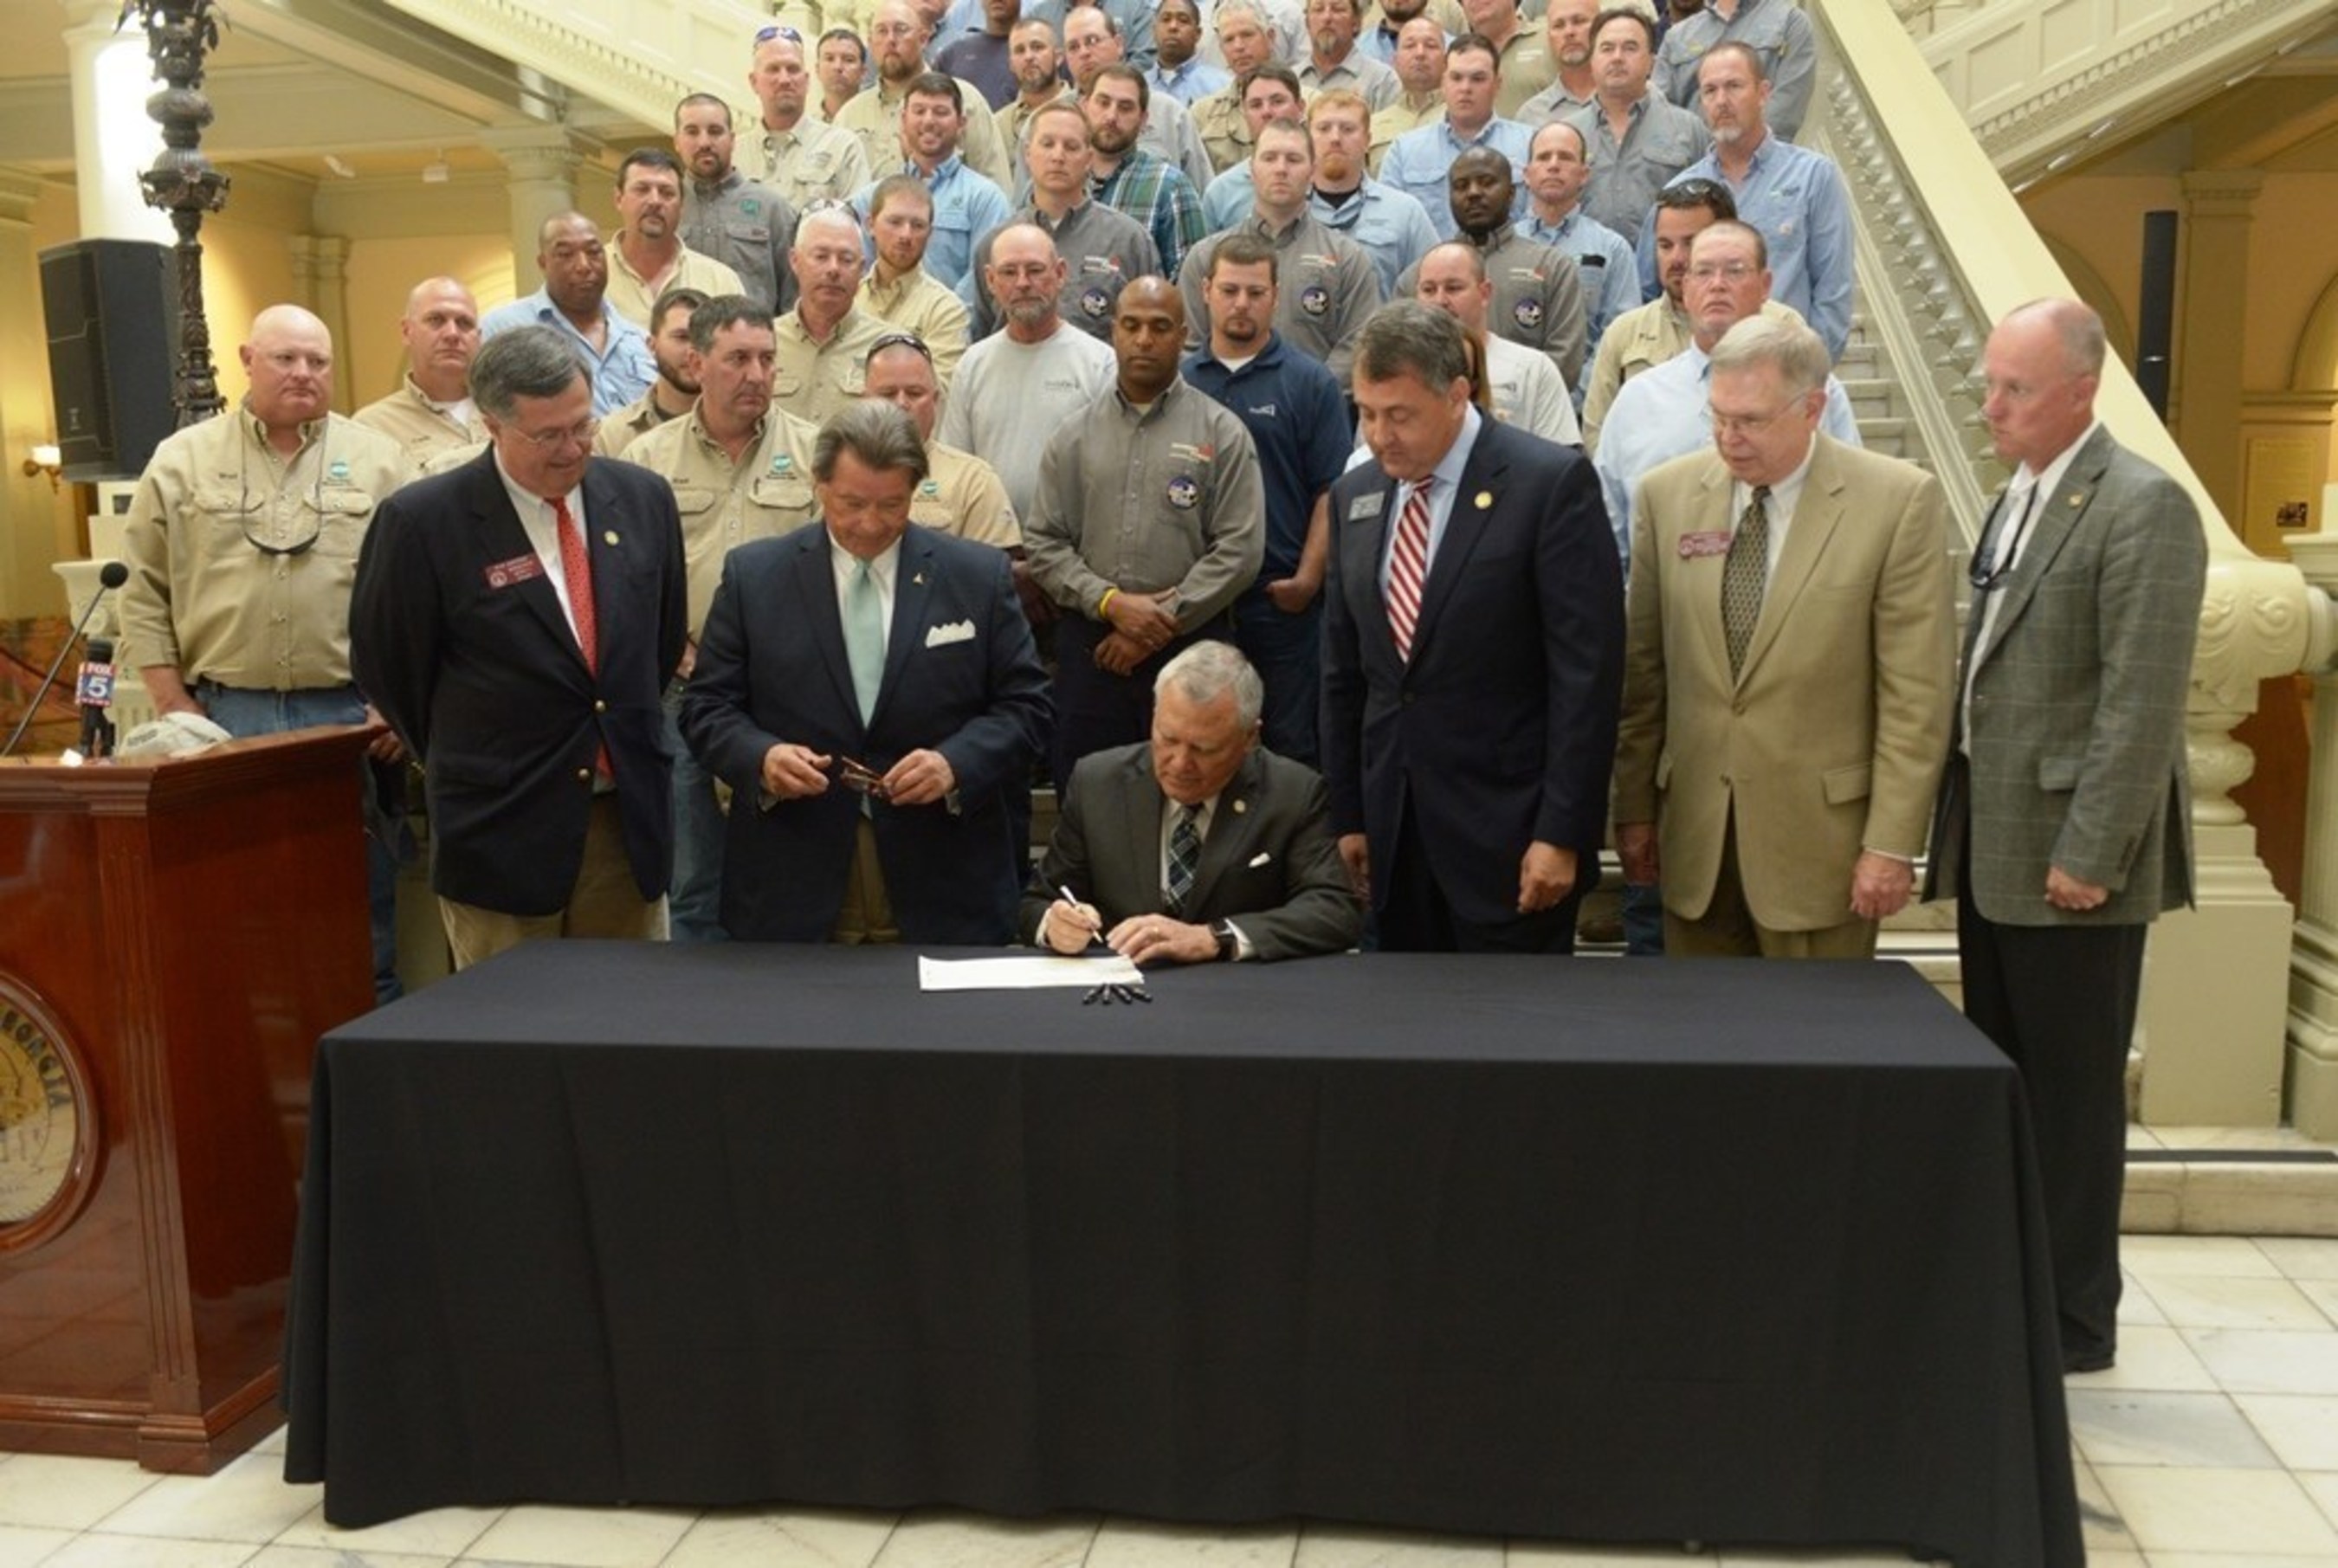 Governor Nathan Deal marks Lineman Appreciation Month by signing House Bill 767 into law Tuesday. The legislation adds utility vehicles and workers to an existing law which requires drivers to "move over" one lane.